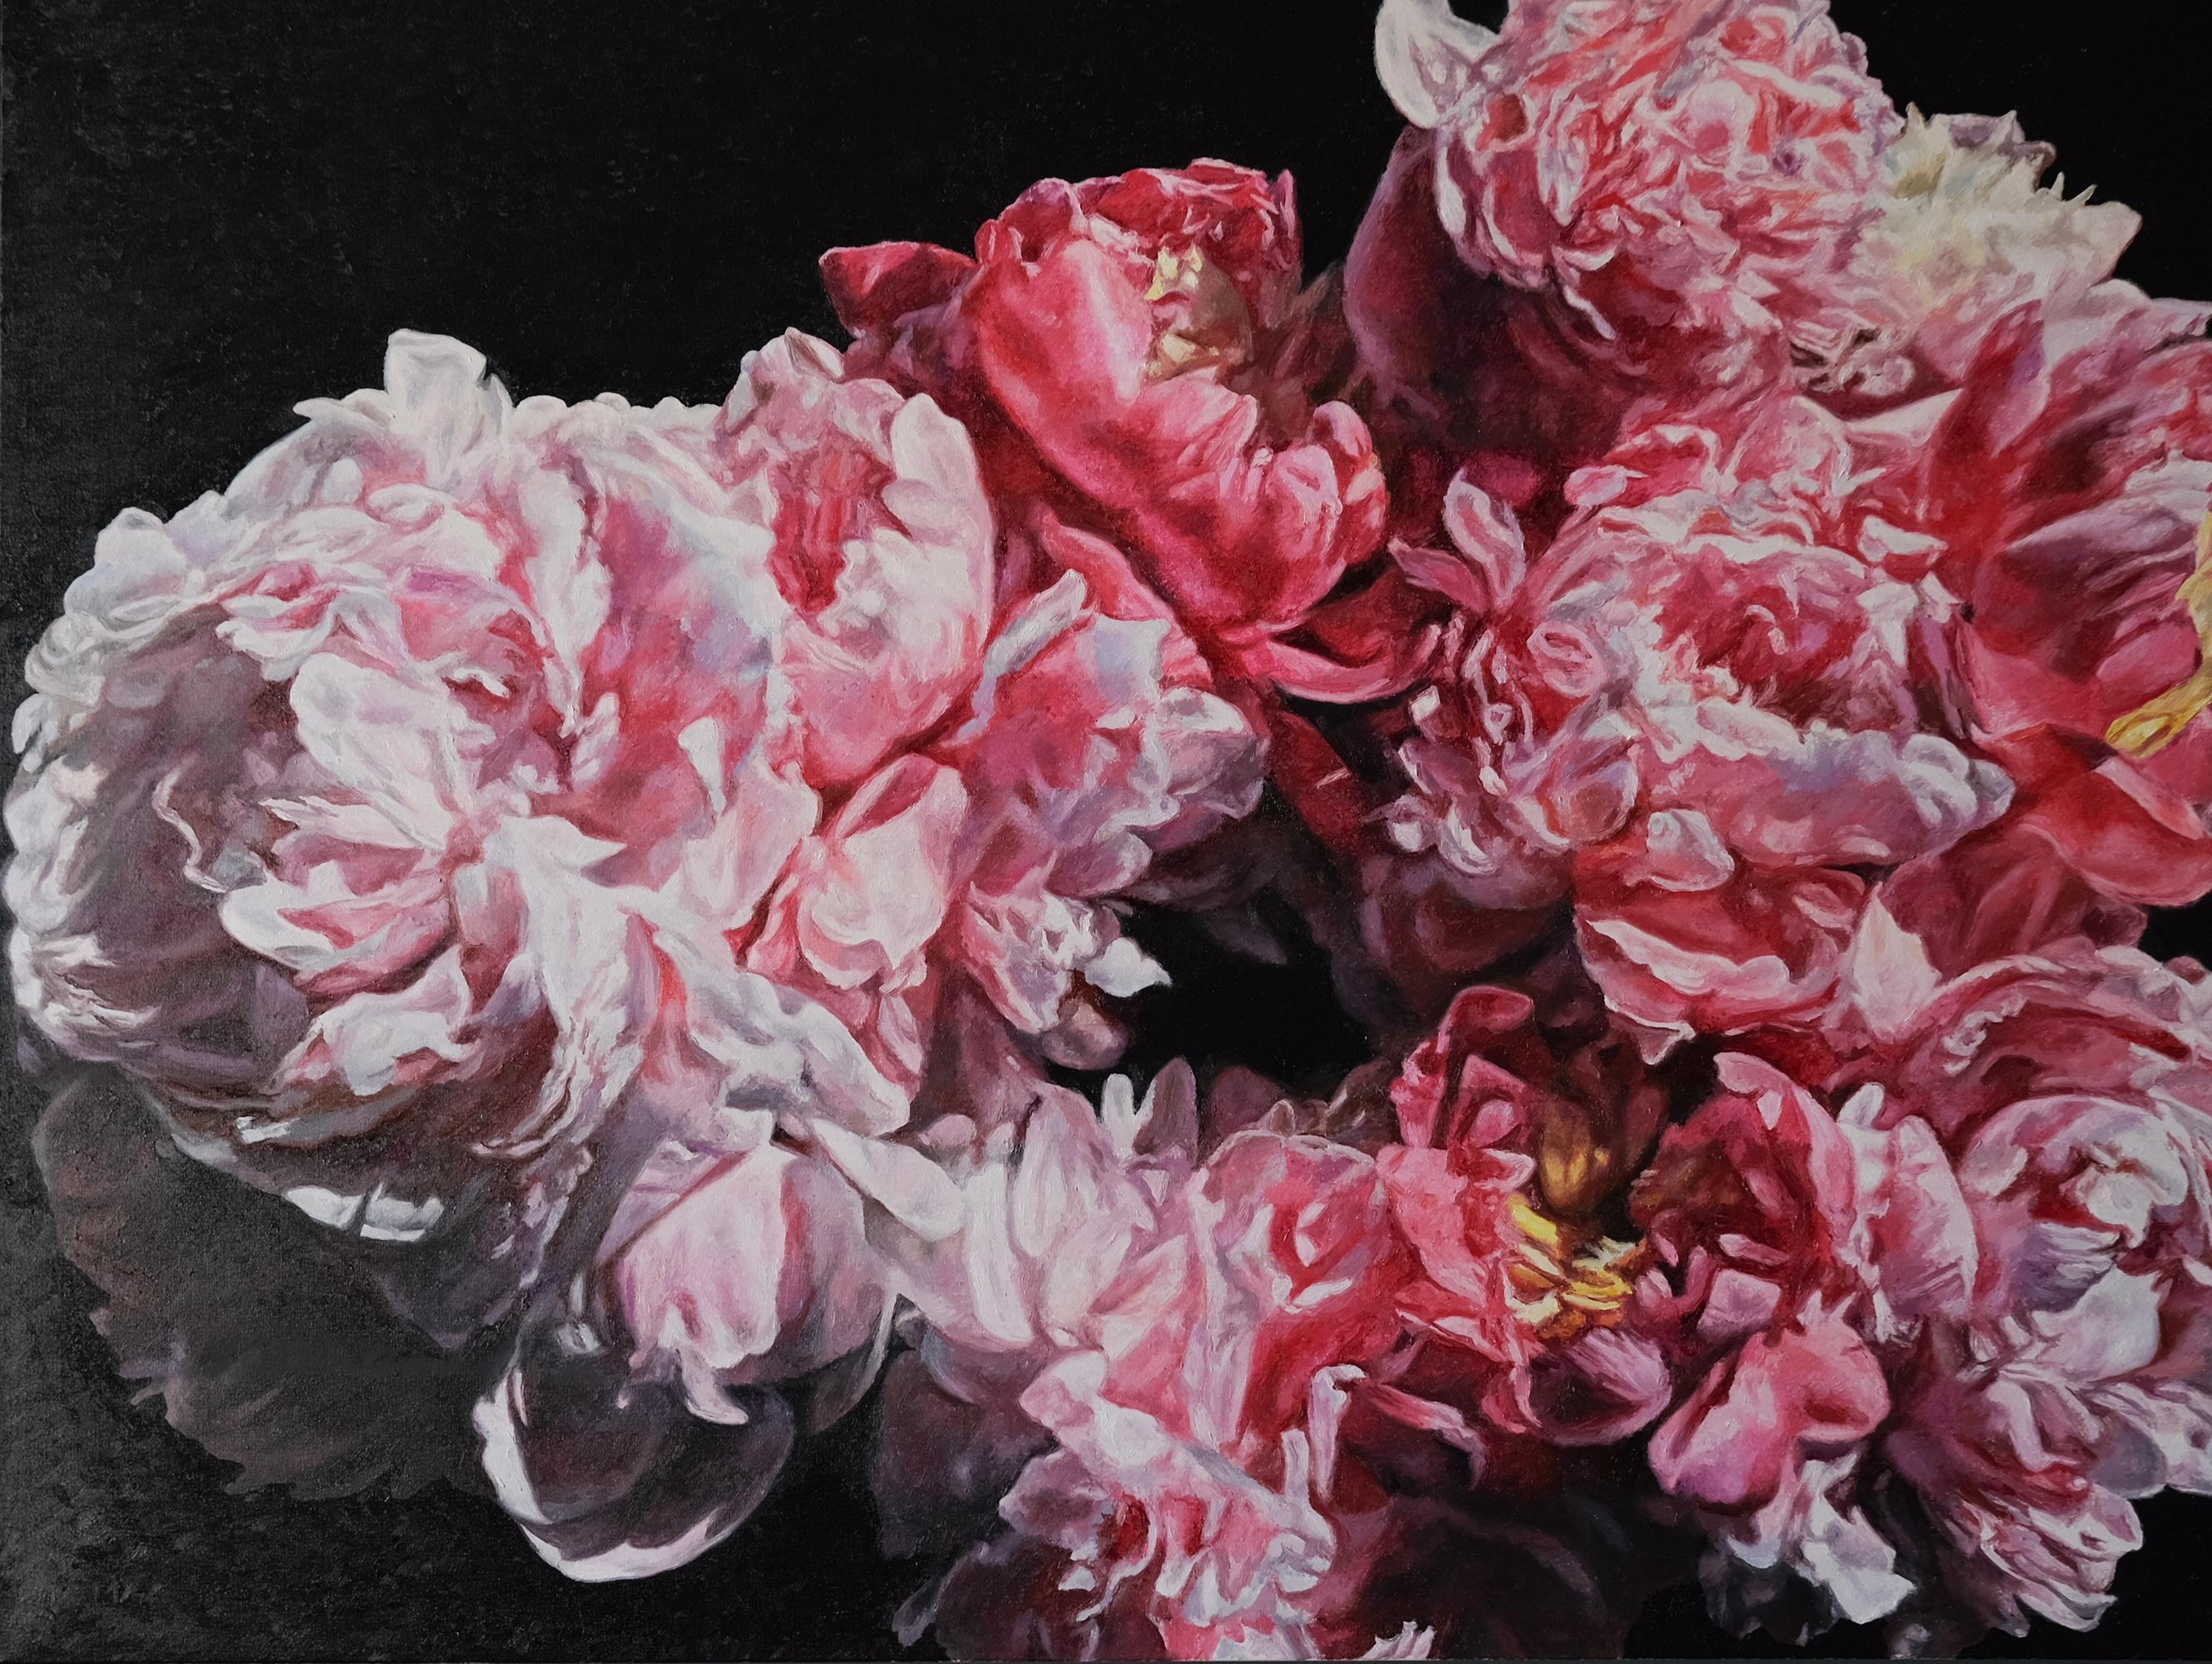 Coral Peonies June-original modern realism floral oil painting-contemporary Art - Painting by Robert Lemay